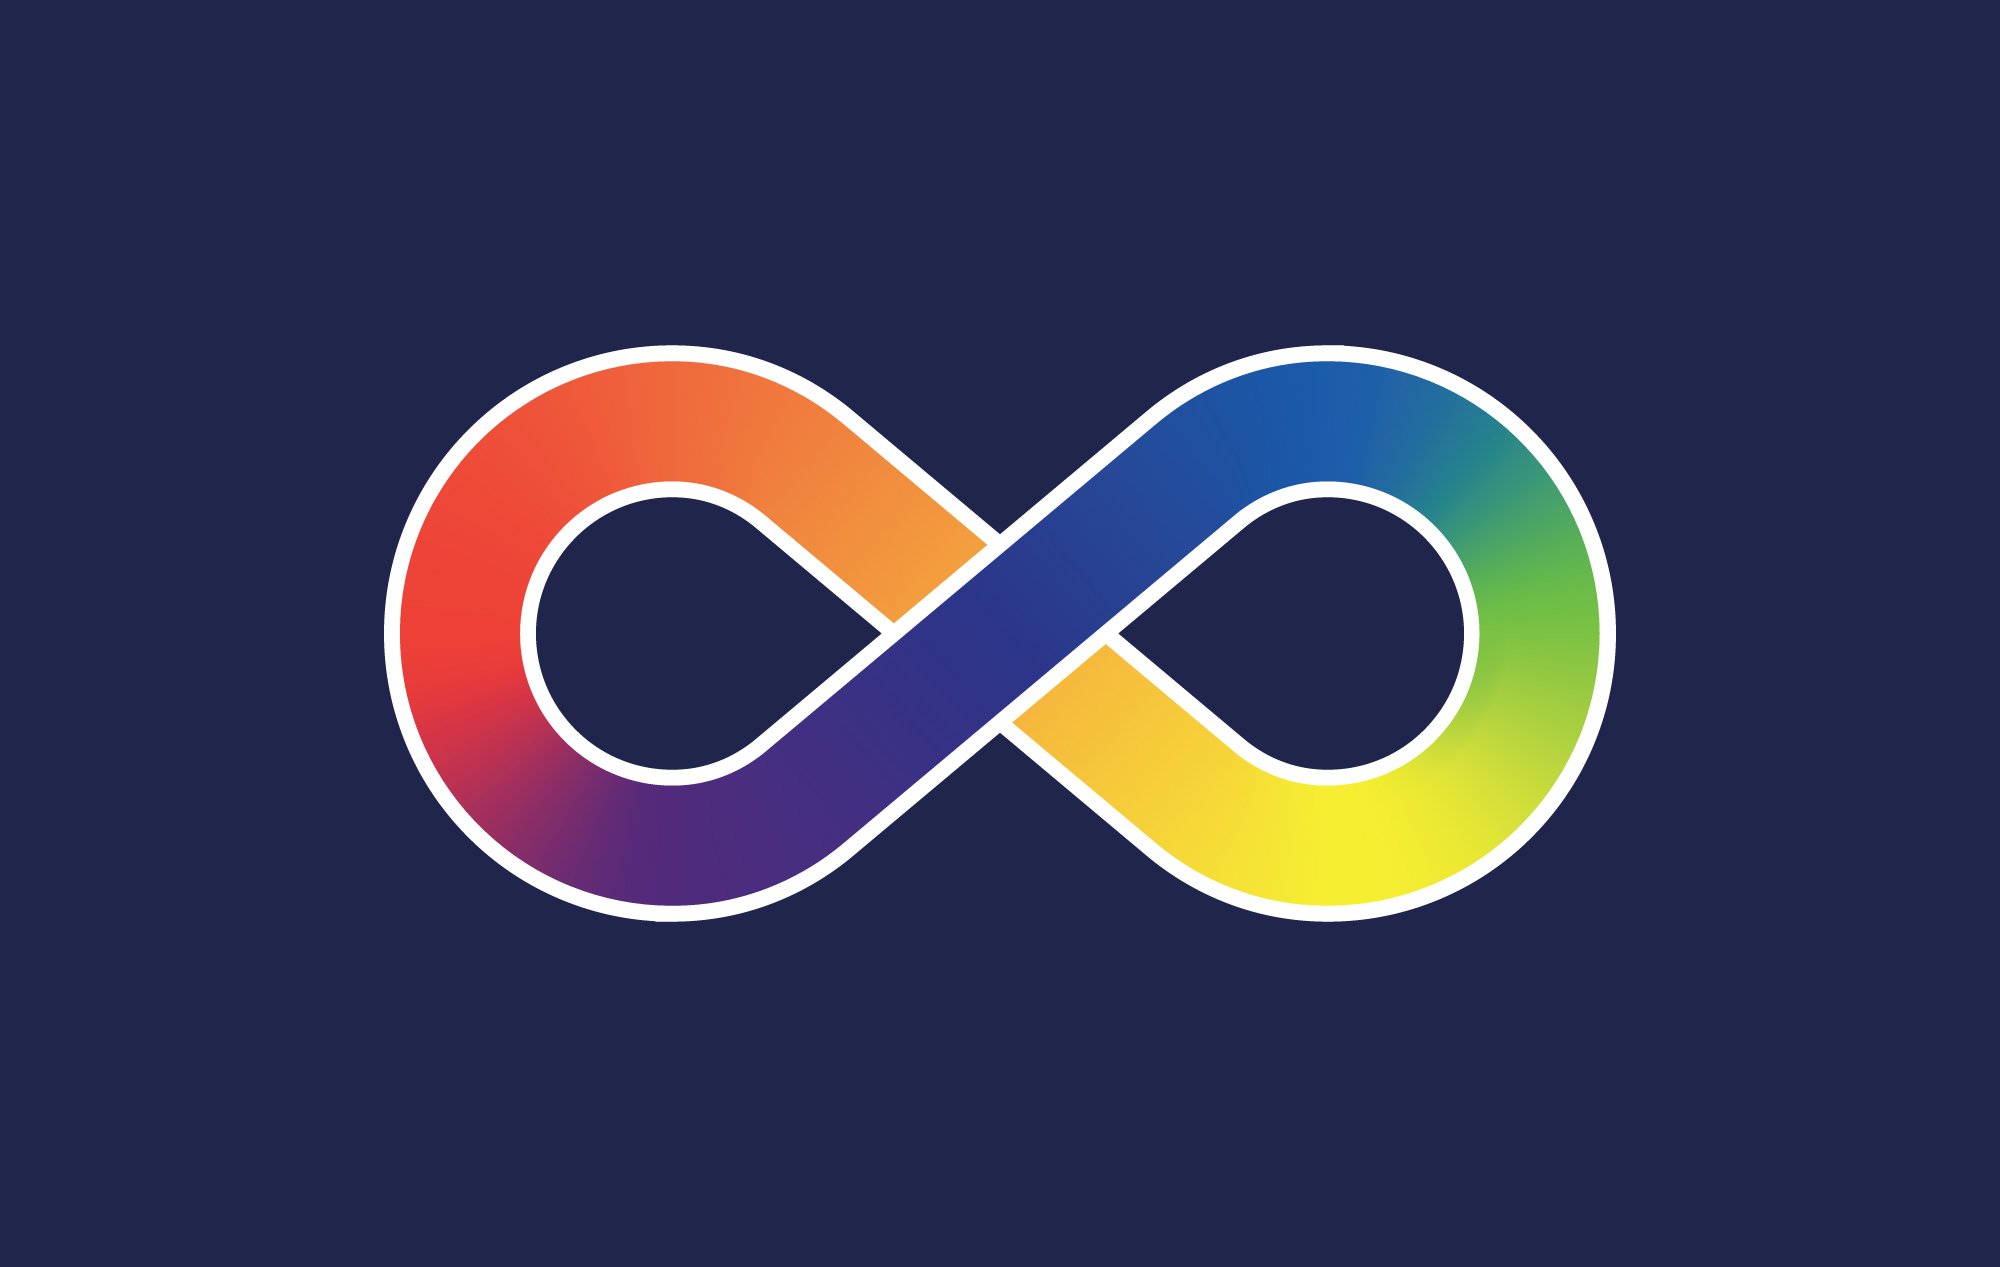 The Autistic Pride symbol on a navy background.